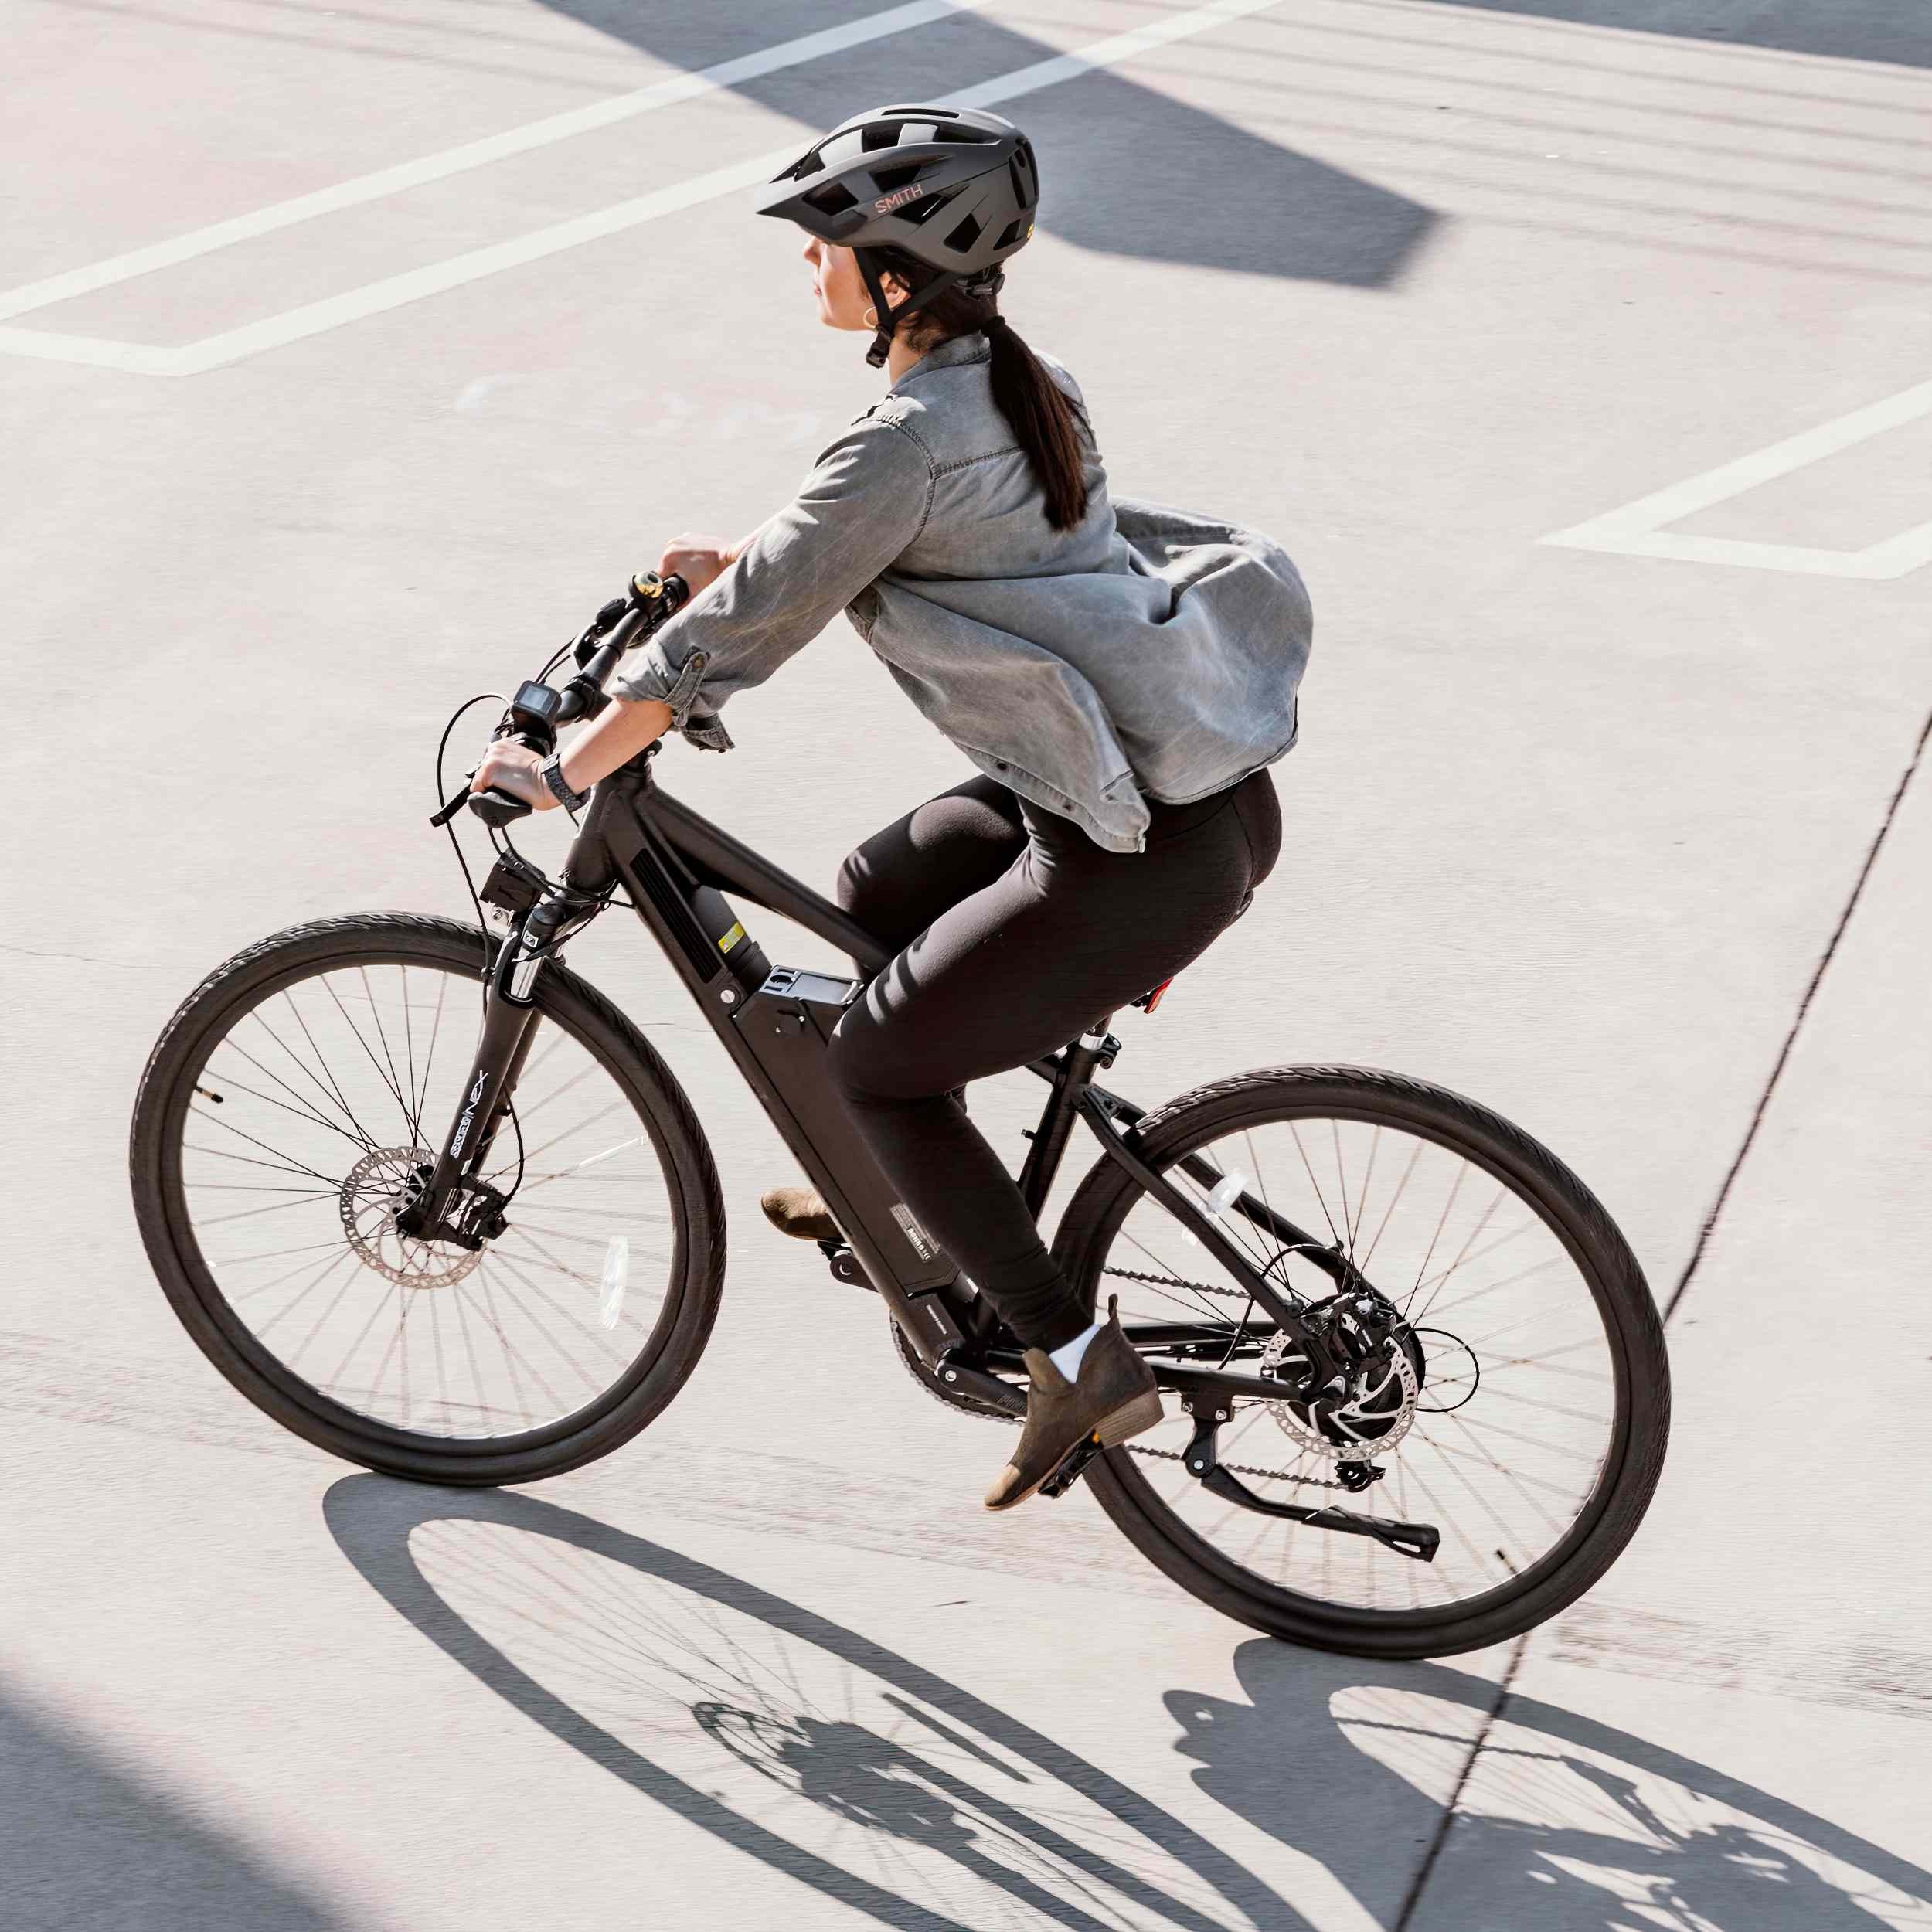  Juiced Bikes started as a lithium-ion battery importer in 2009 before Tora Harris took a leap of faith and started developing and manufacturing his own E-Bikes. 